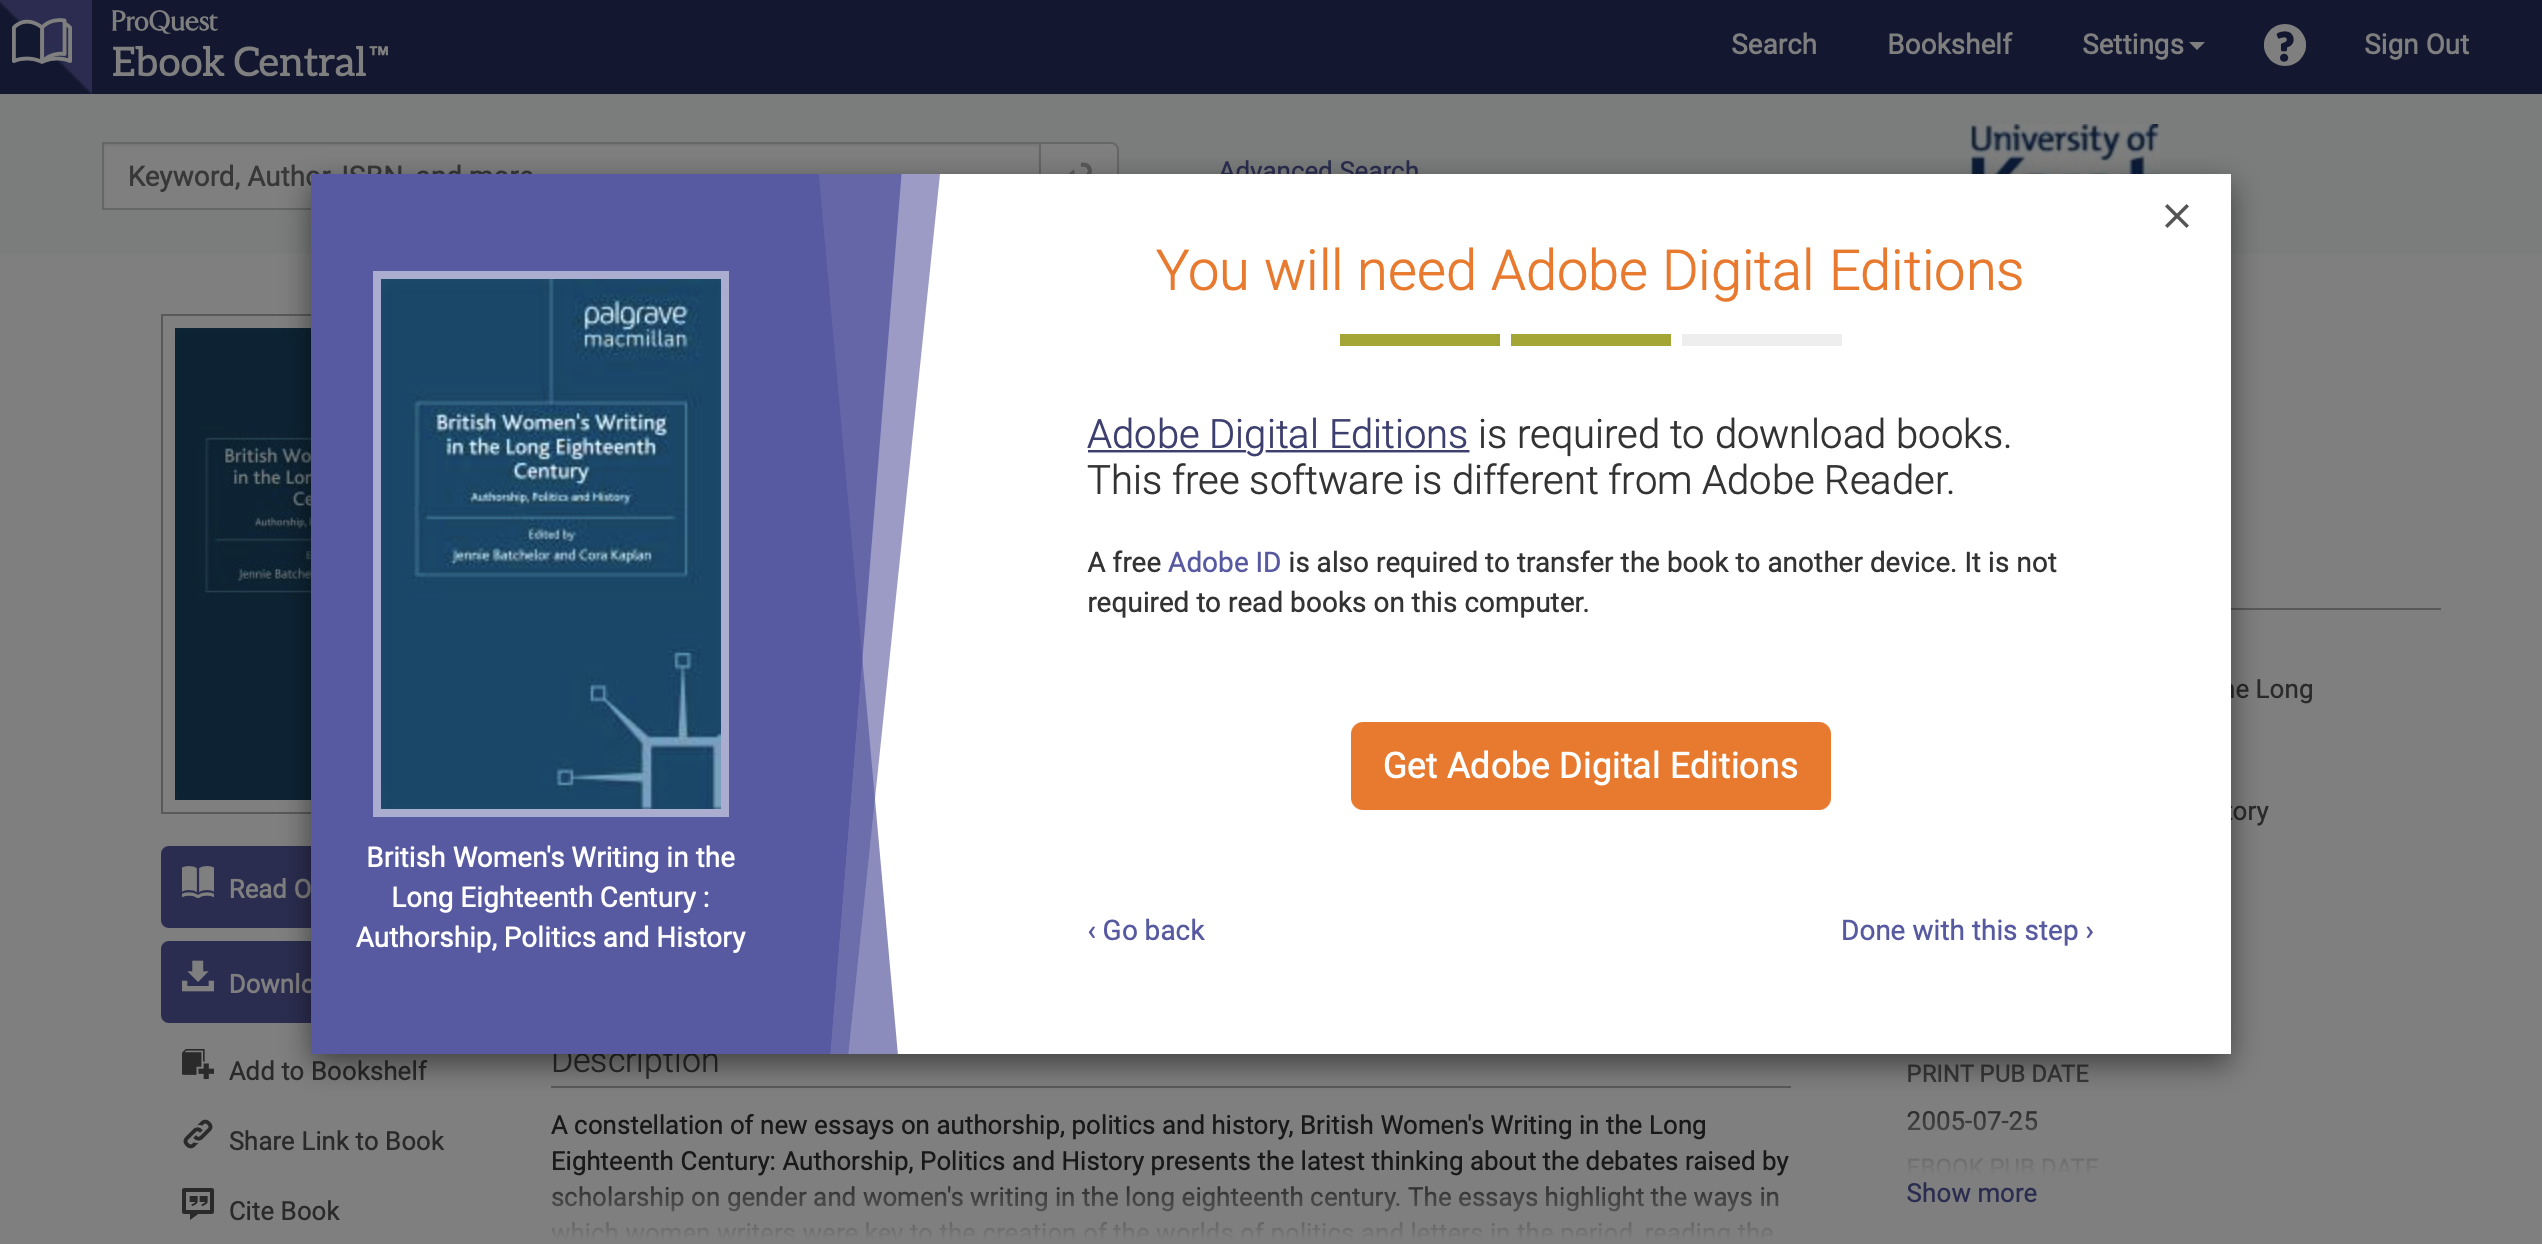 Screenshot of popup screen prompt for Adobe Digital Editions, the software needed to download some e-books in full